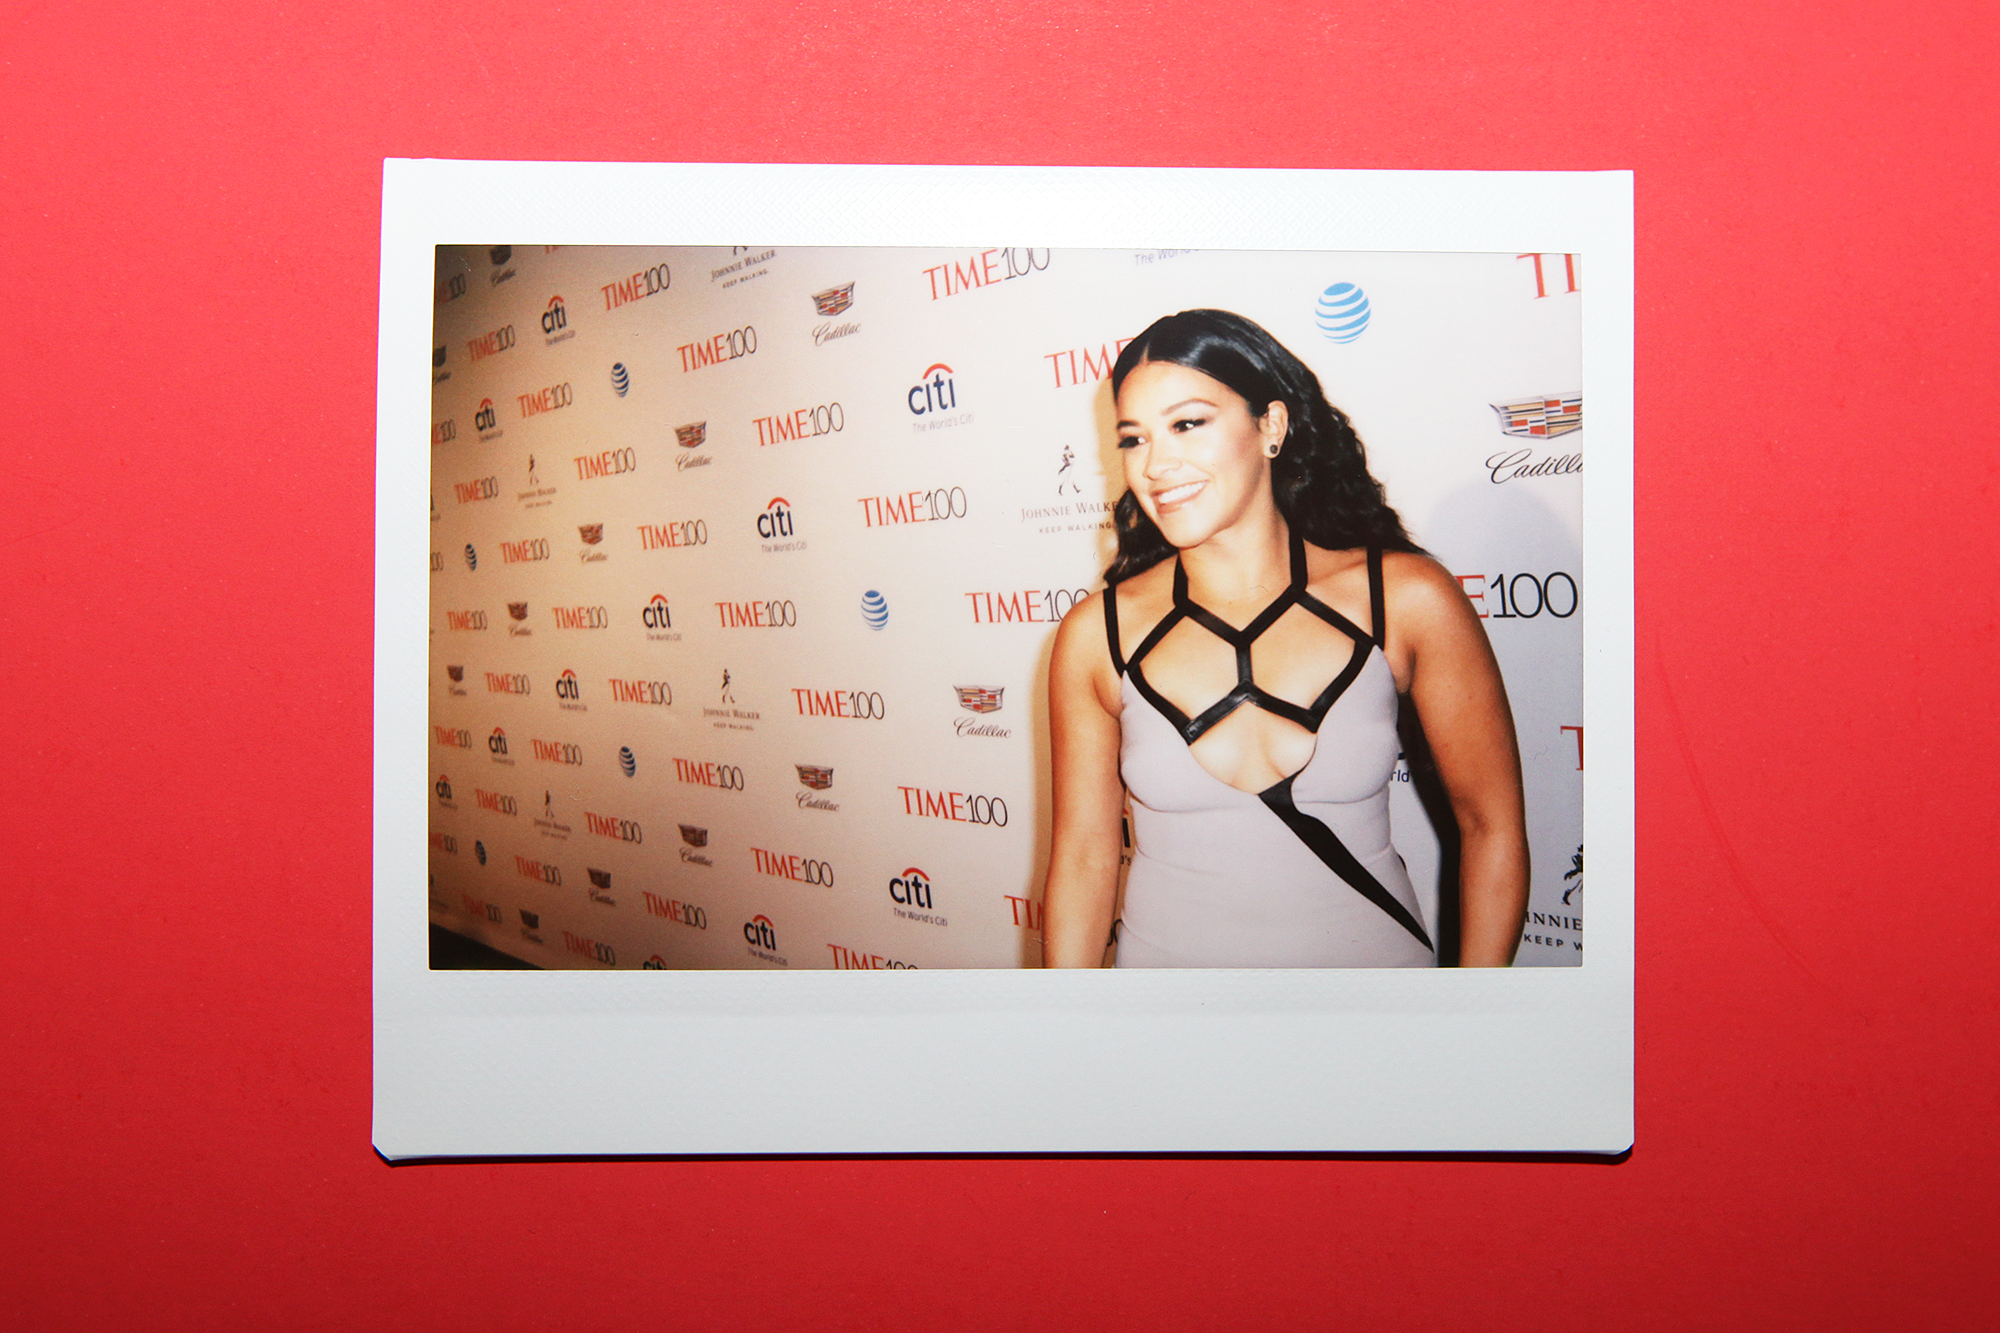 Gina Rodriguez arrives at the TIME 100 Gala at the Time Warner Center on April 26, 2016 in New York City.